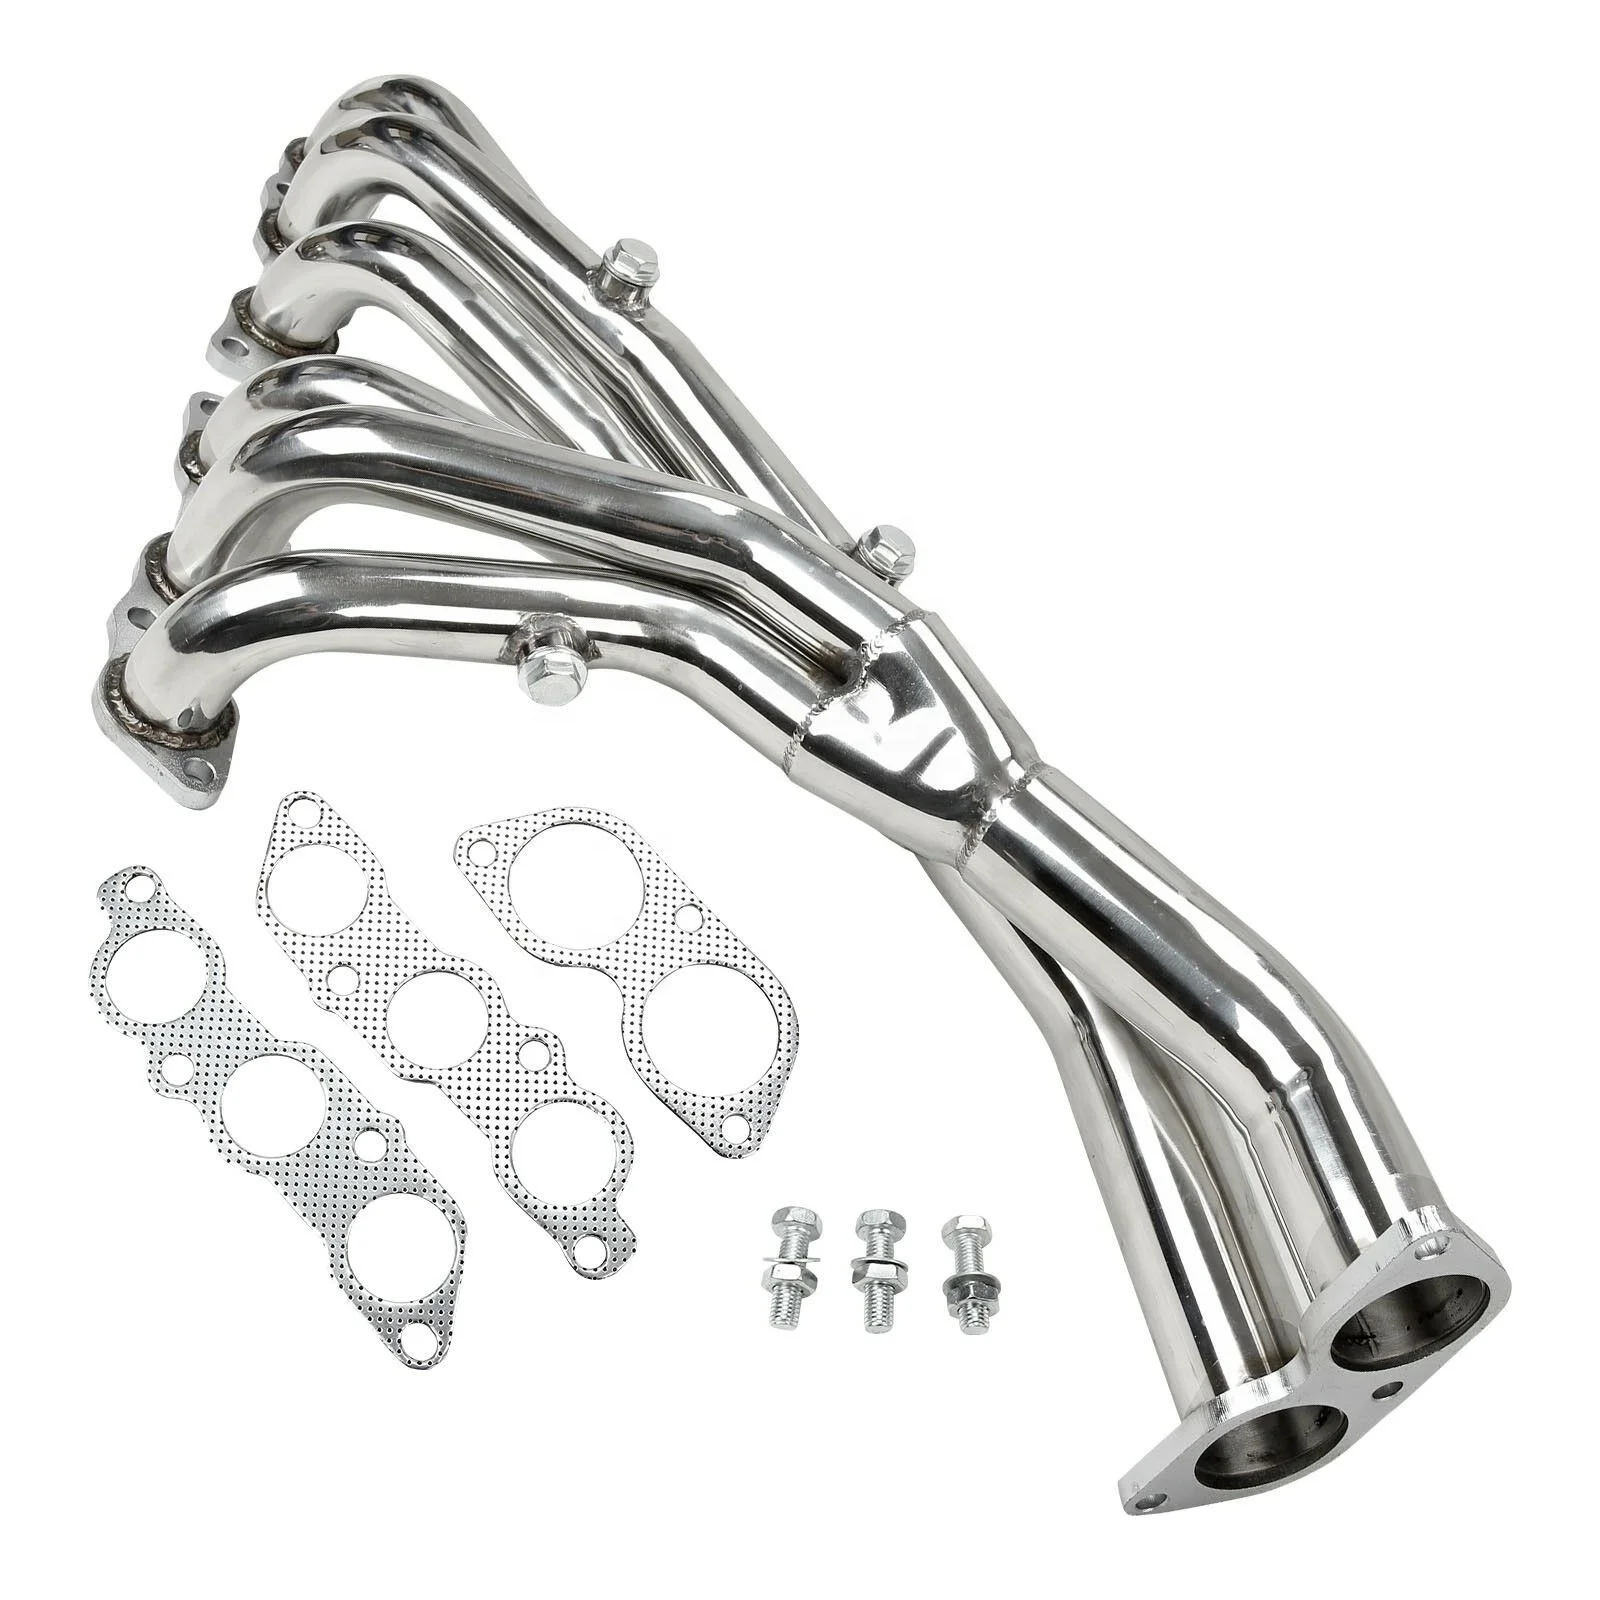 Manifold Header/exhaust For 01-05 Is300 Altezza Xe10 3.0l L6 2jz-g - Buy  Exhaust Headers For Is300,Is300 Header Product on Alibaba.com